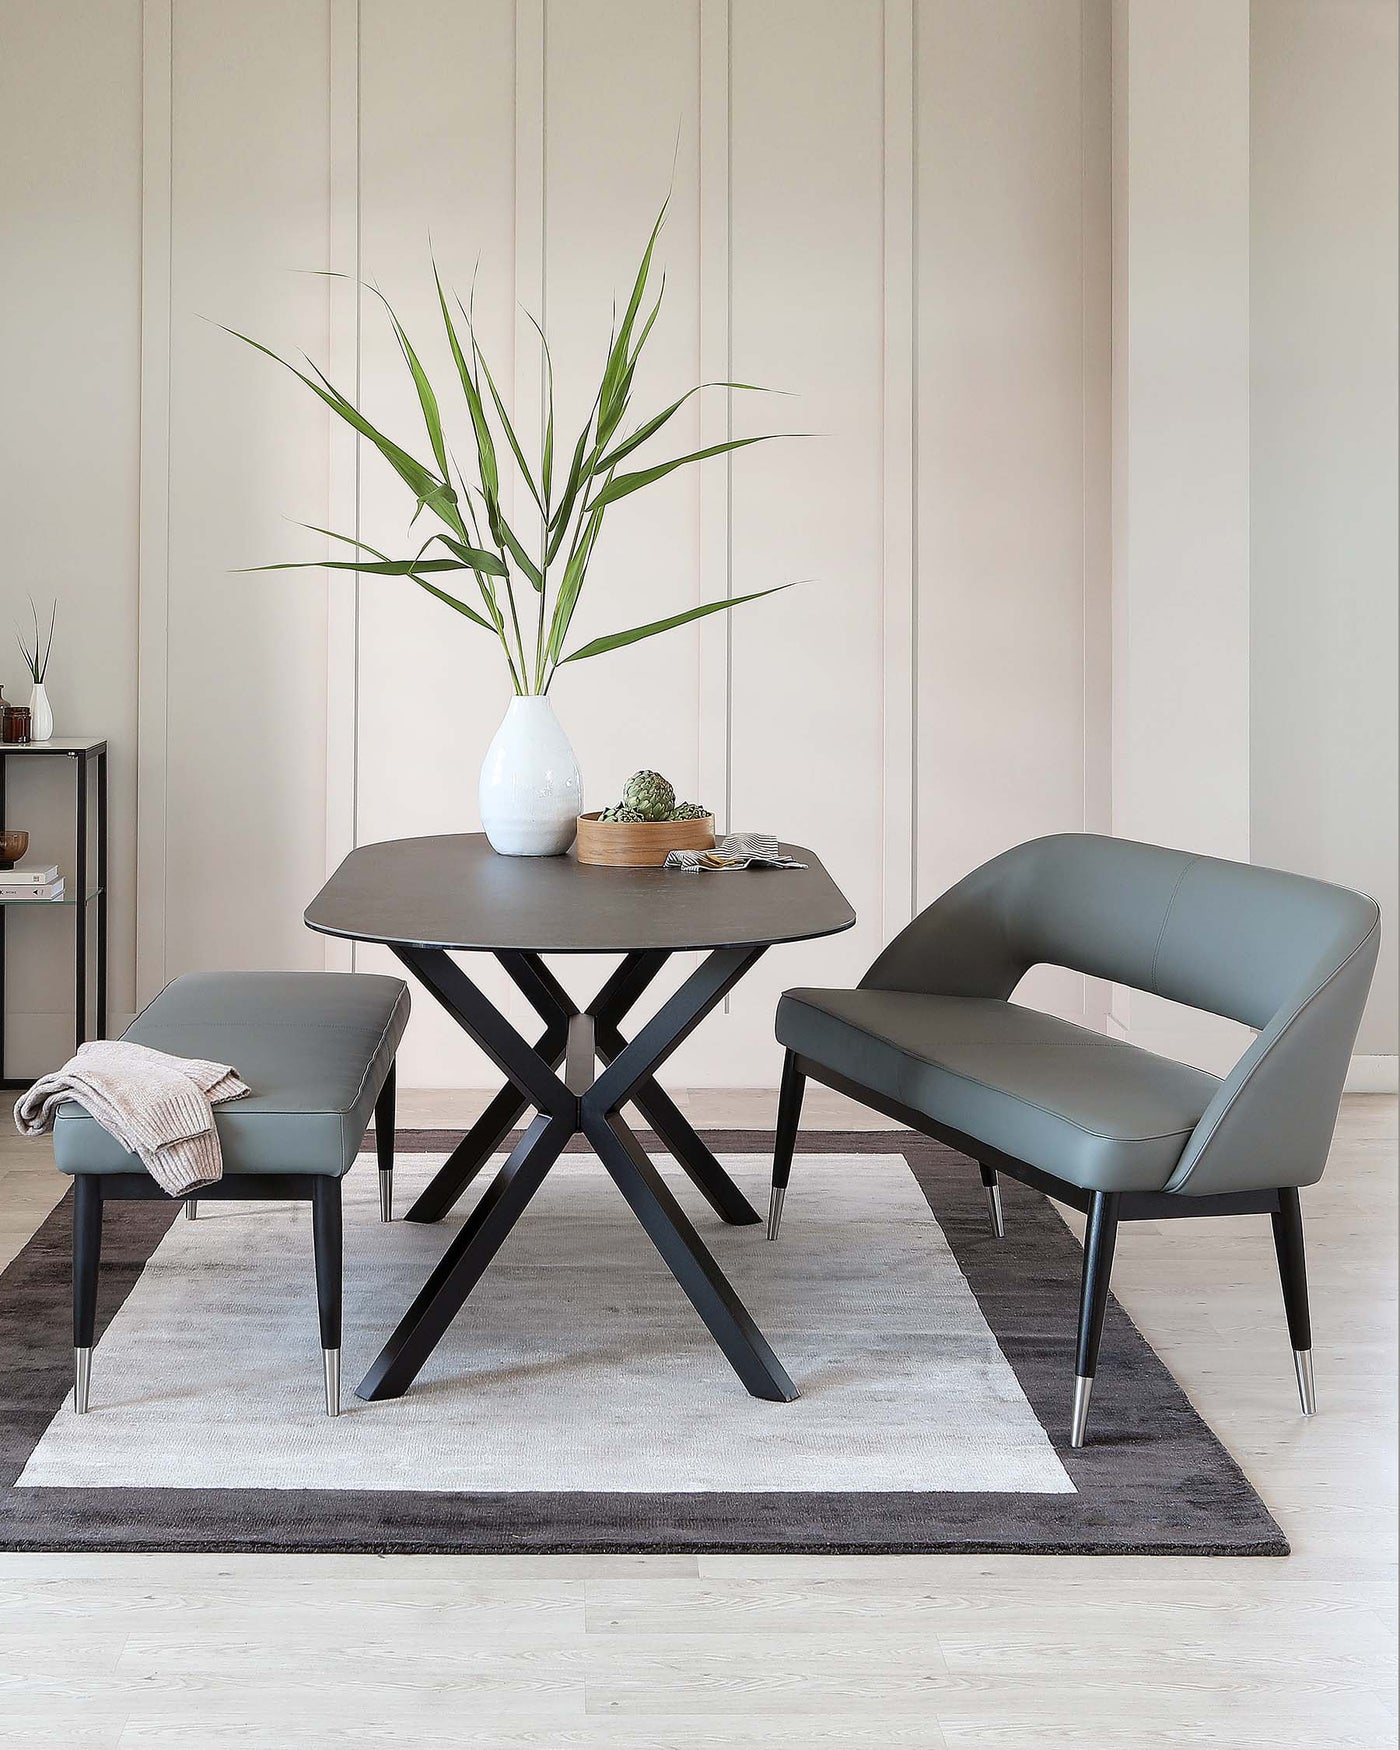 Modern minimalist furniture set in a neutral-toned room, featuring a sleek, round, black dining table with a unique X-shaped base, complemented by a pair of streamlined, dark grey armchairs with metallic accents on the legs. The set is arranged on a two-tone grey area rug, and the table is accessorized with a tall white vase containing green foliage, alongside small decorative items. In the background, a dark shelving unit holds assorted decor.